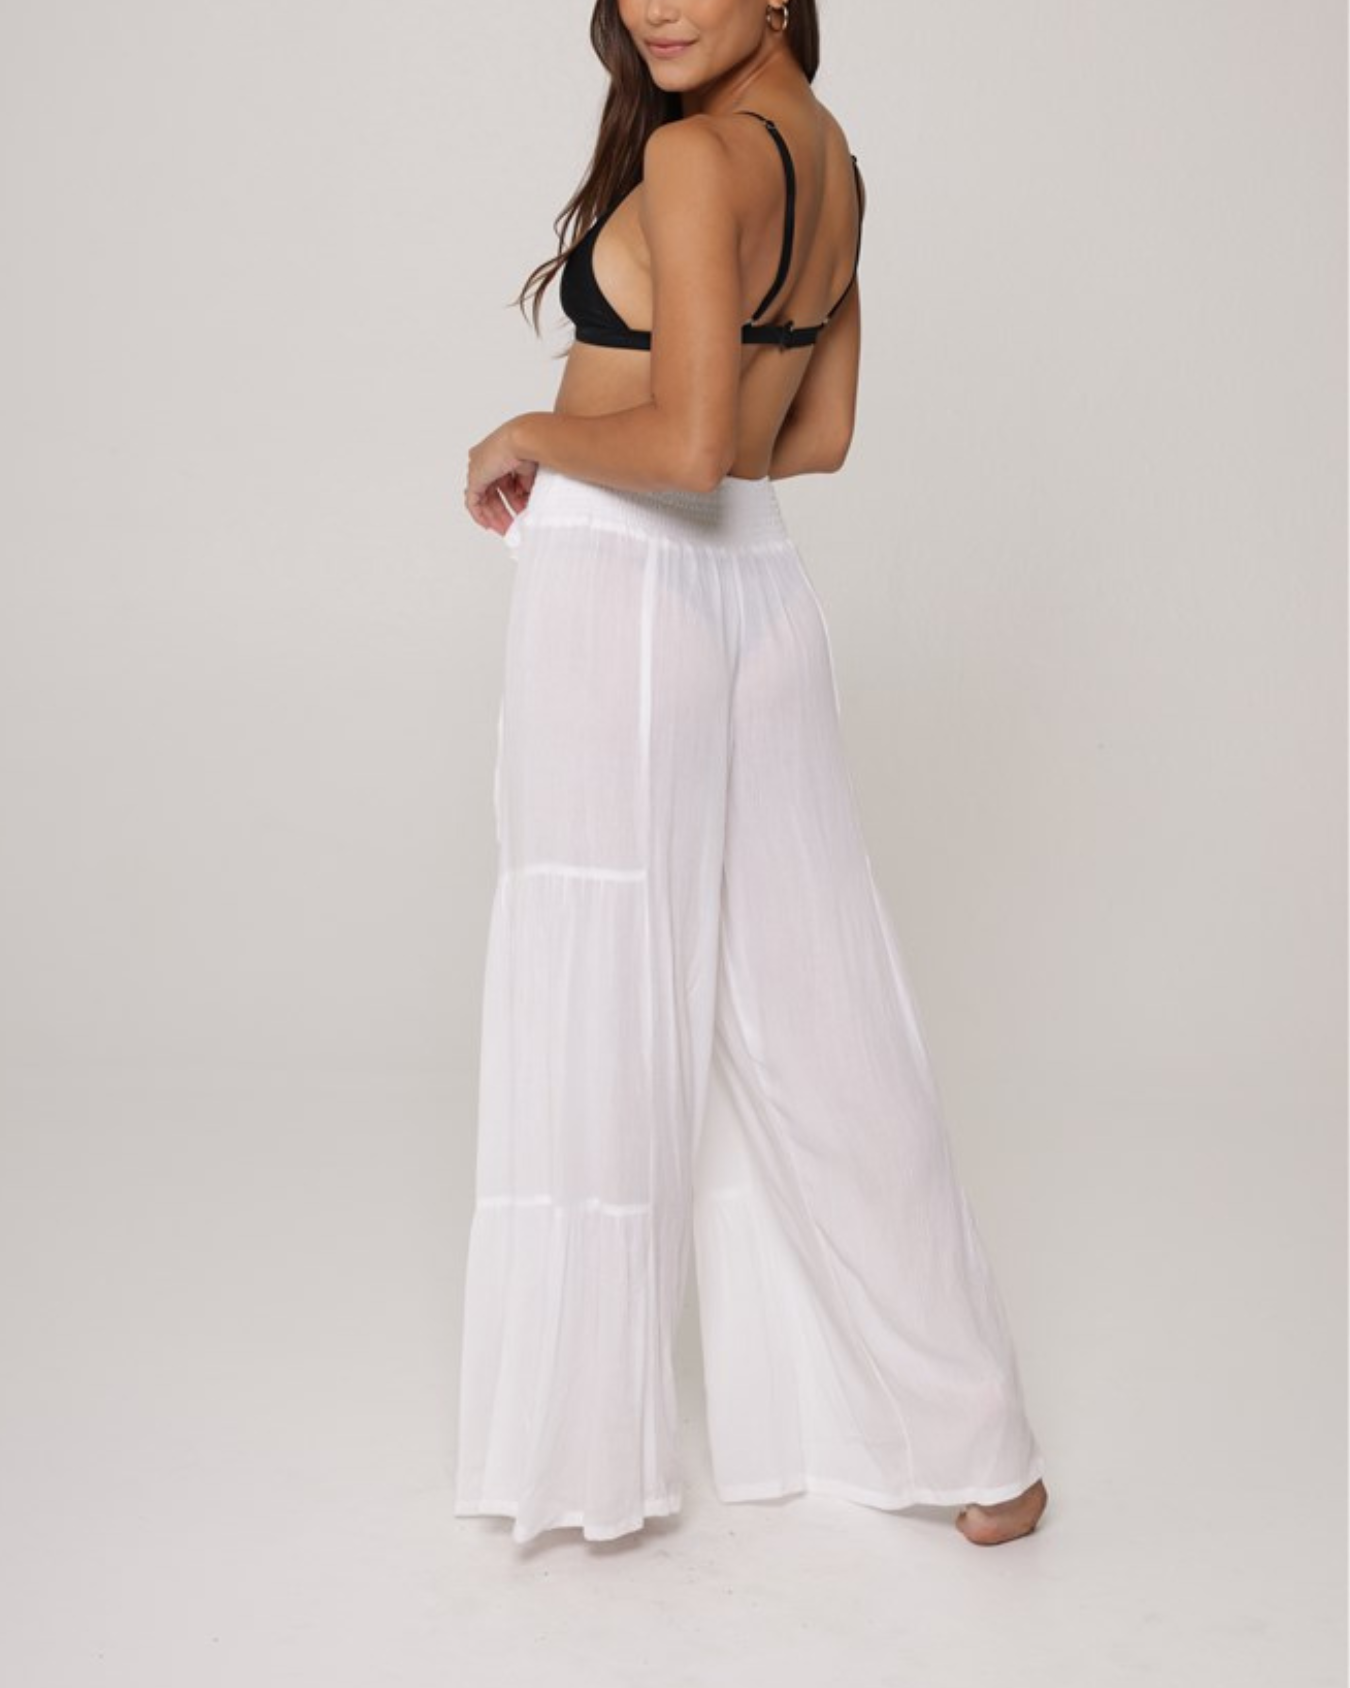 Model wearing a tiered cover up pant with tie belt in white